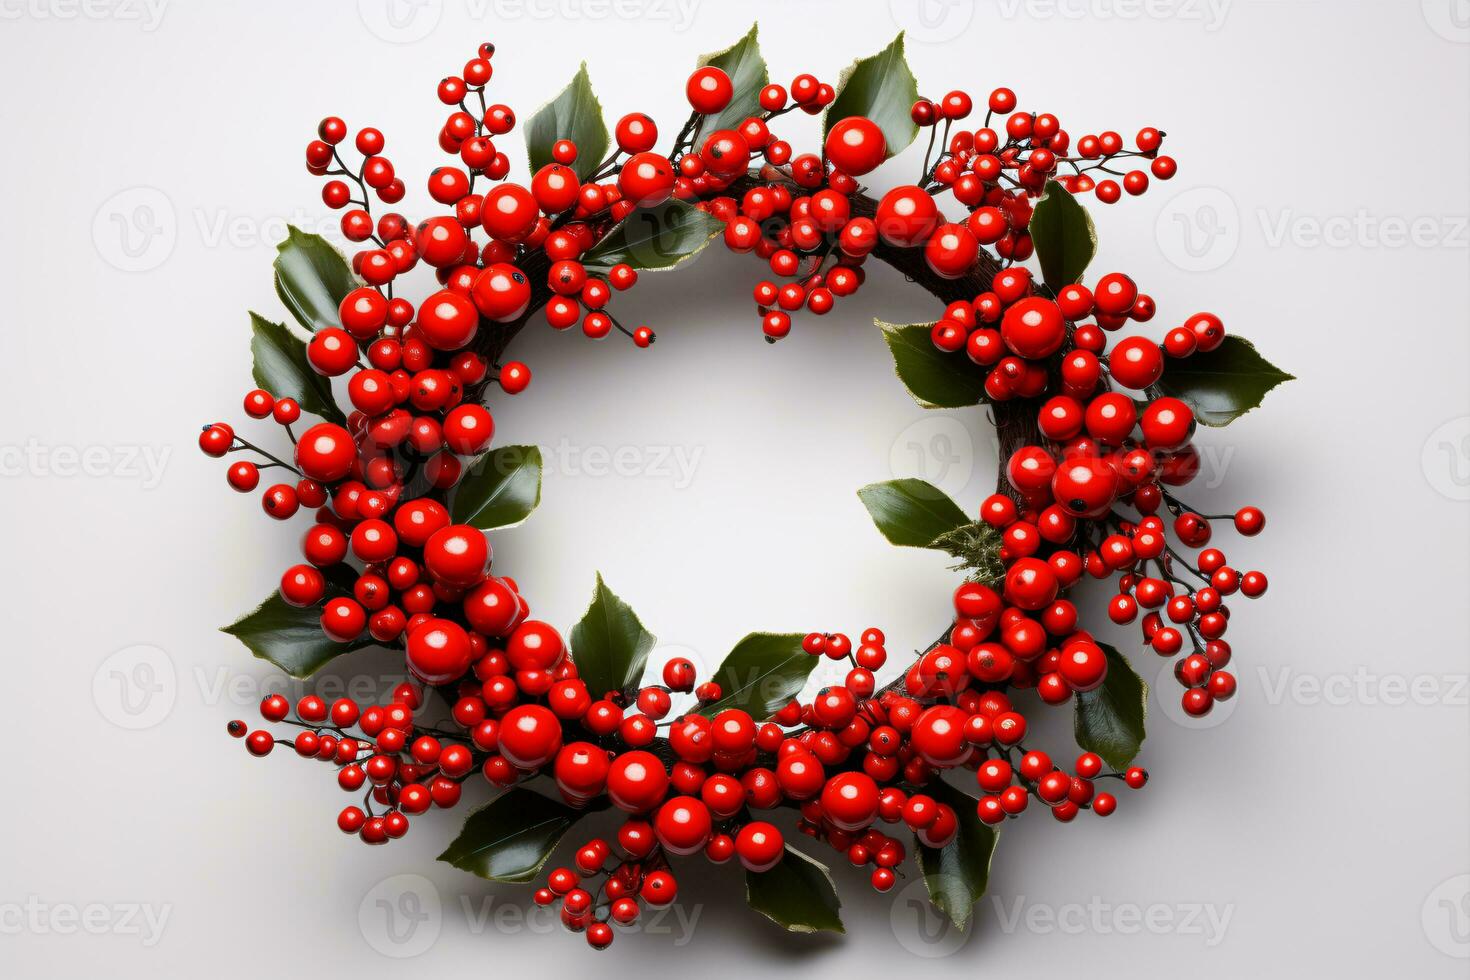 Isolated festive green Christmas wreath on a white backdrop. photo